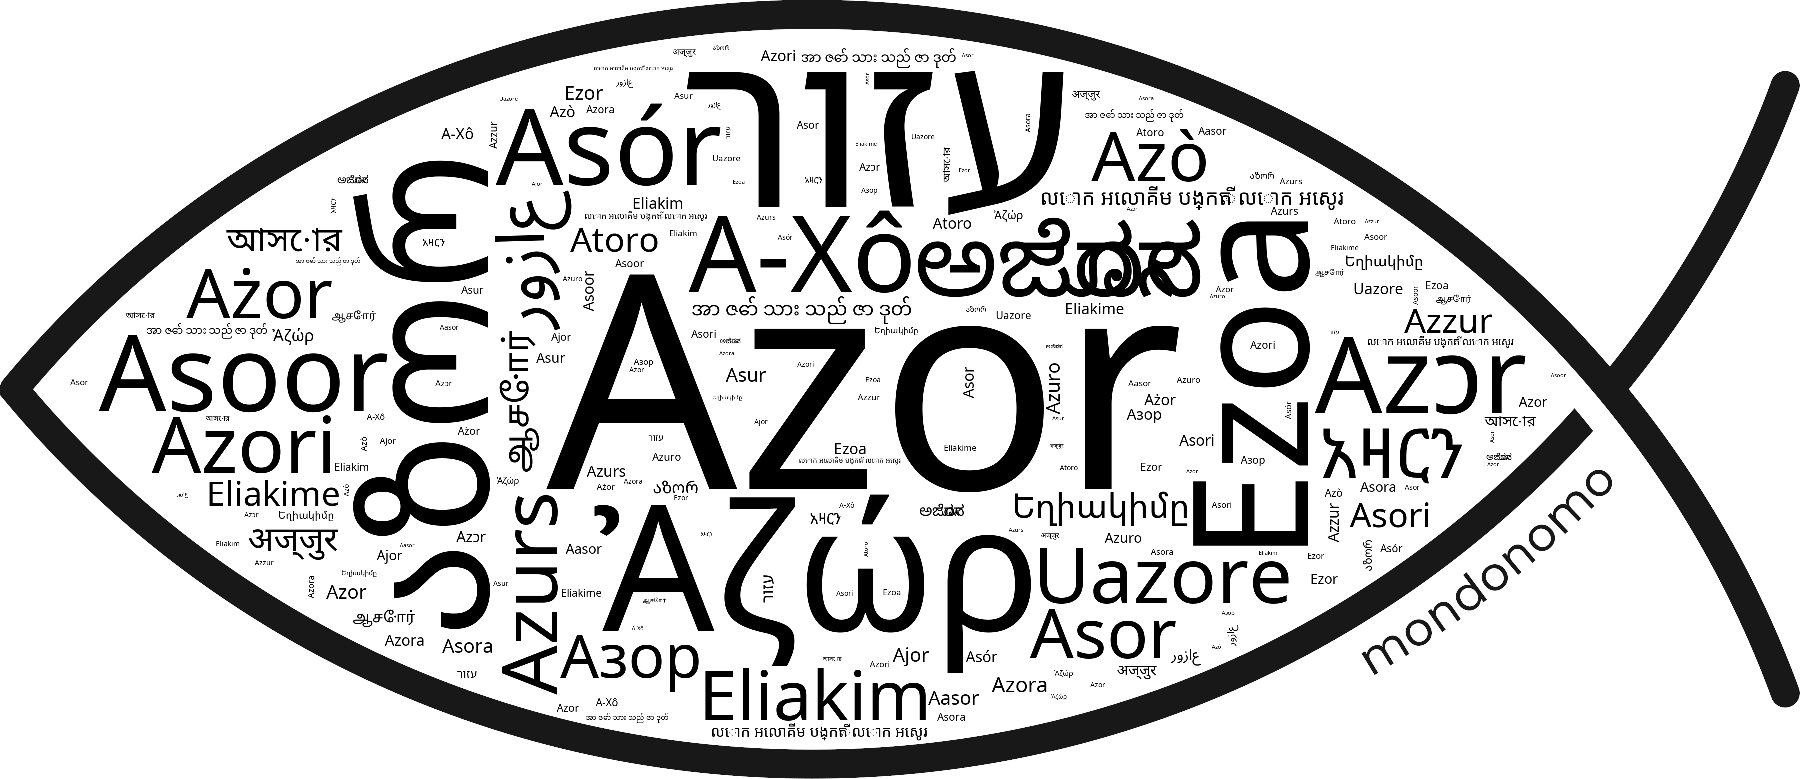 Name Azor in the world's Bibles